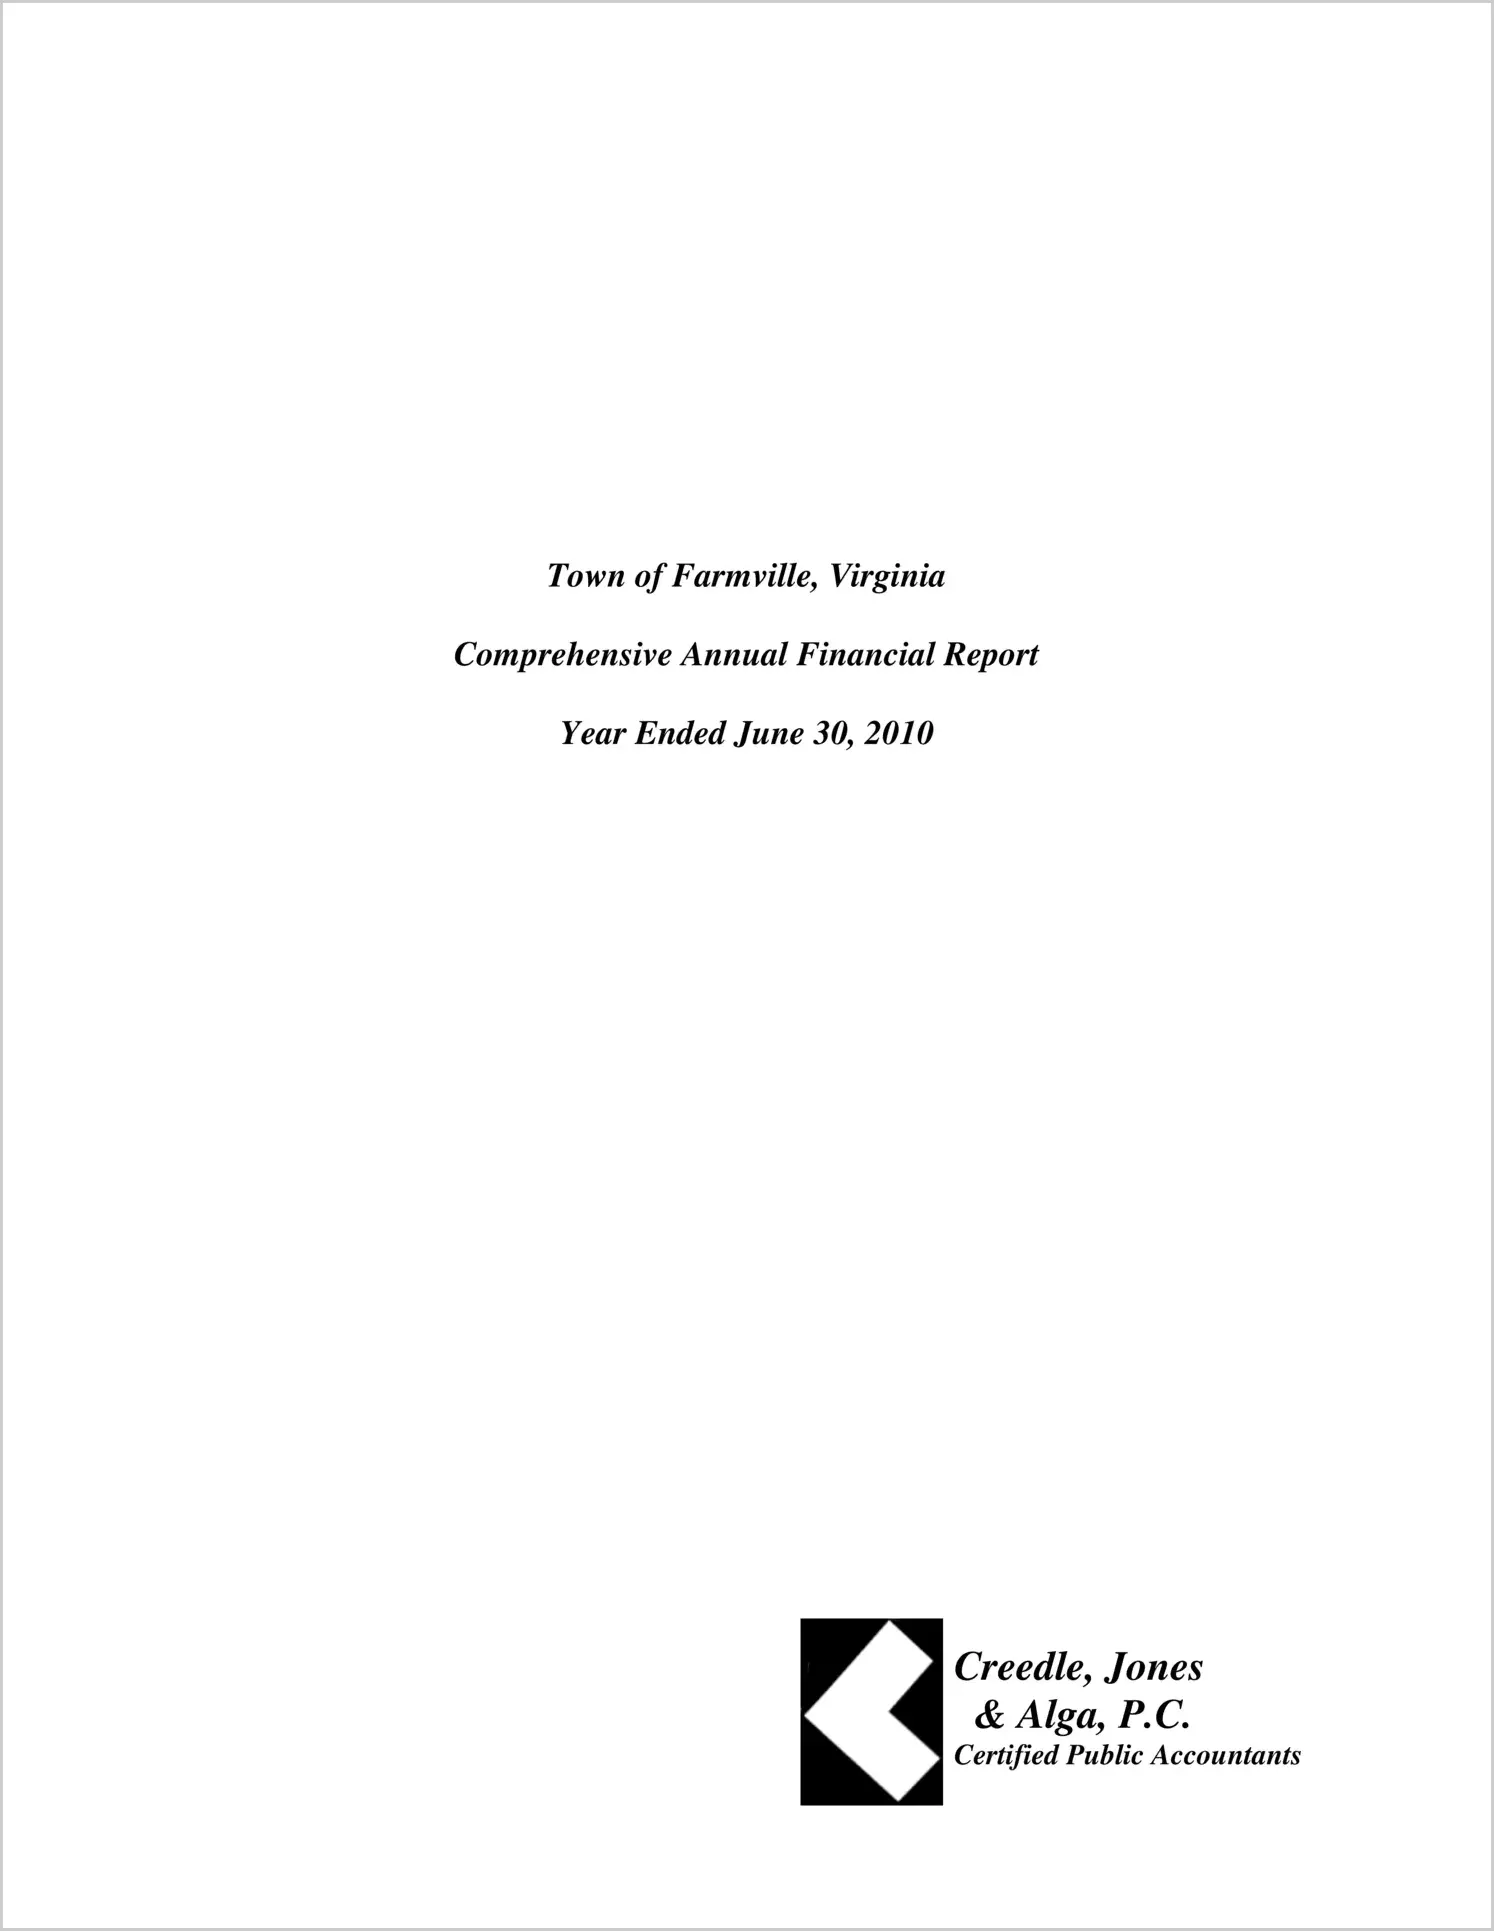 2010 Annual Financial Report for Town of Farmville